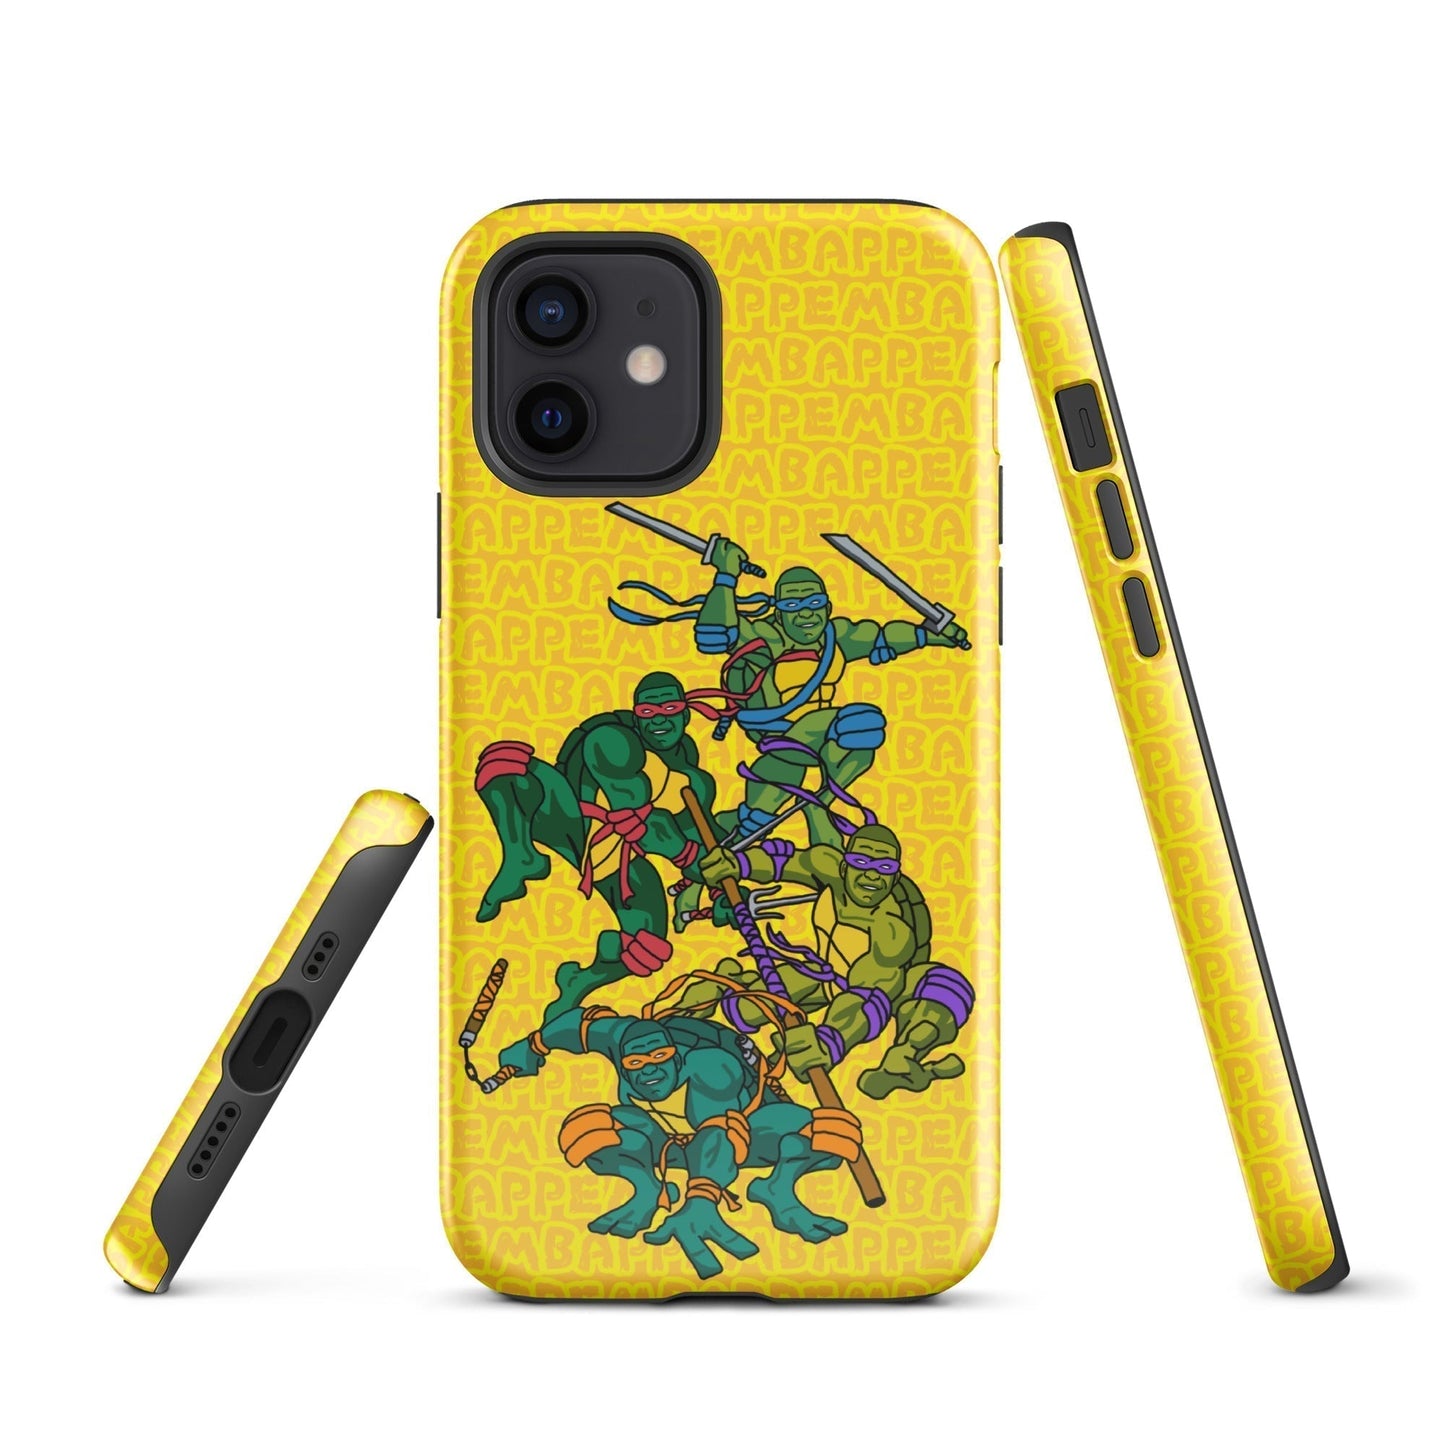 Kylian Mbappe Ninja Turtles funny football/ soccer meme Tough Case for iPhone® yellow Next Cult Brand Football, Kylian Mbappe, Ninja Turtles, PSG